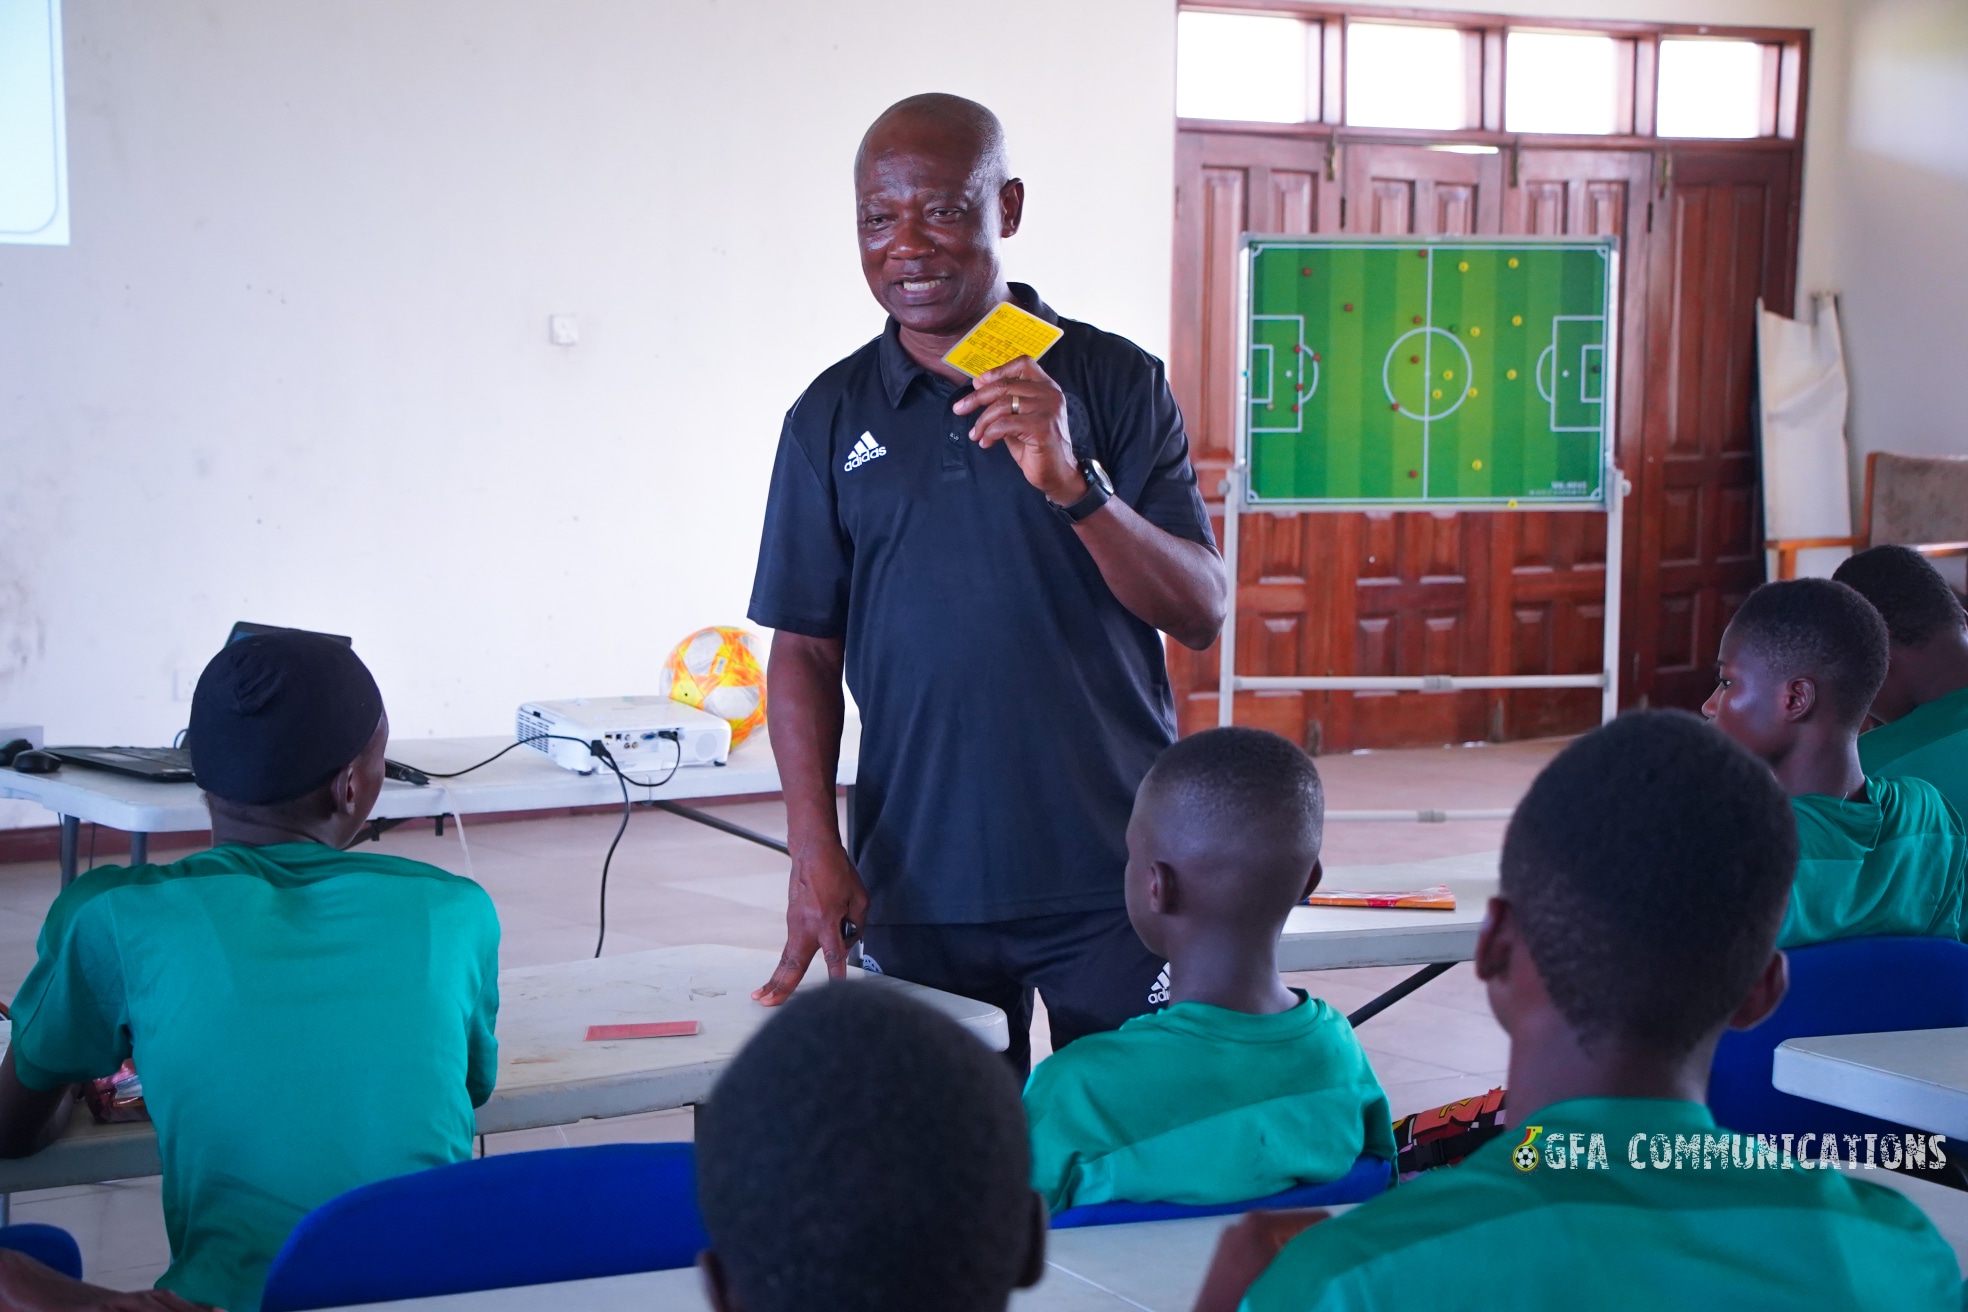 PHOTOS: Catch Them Young referees train at Prampram